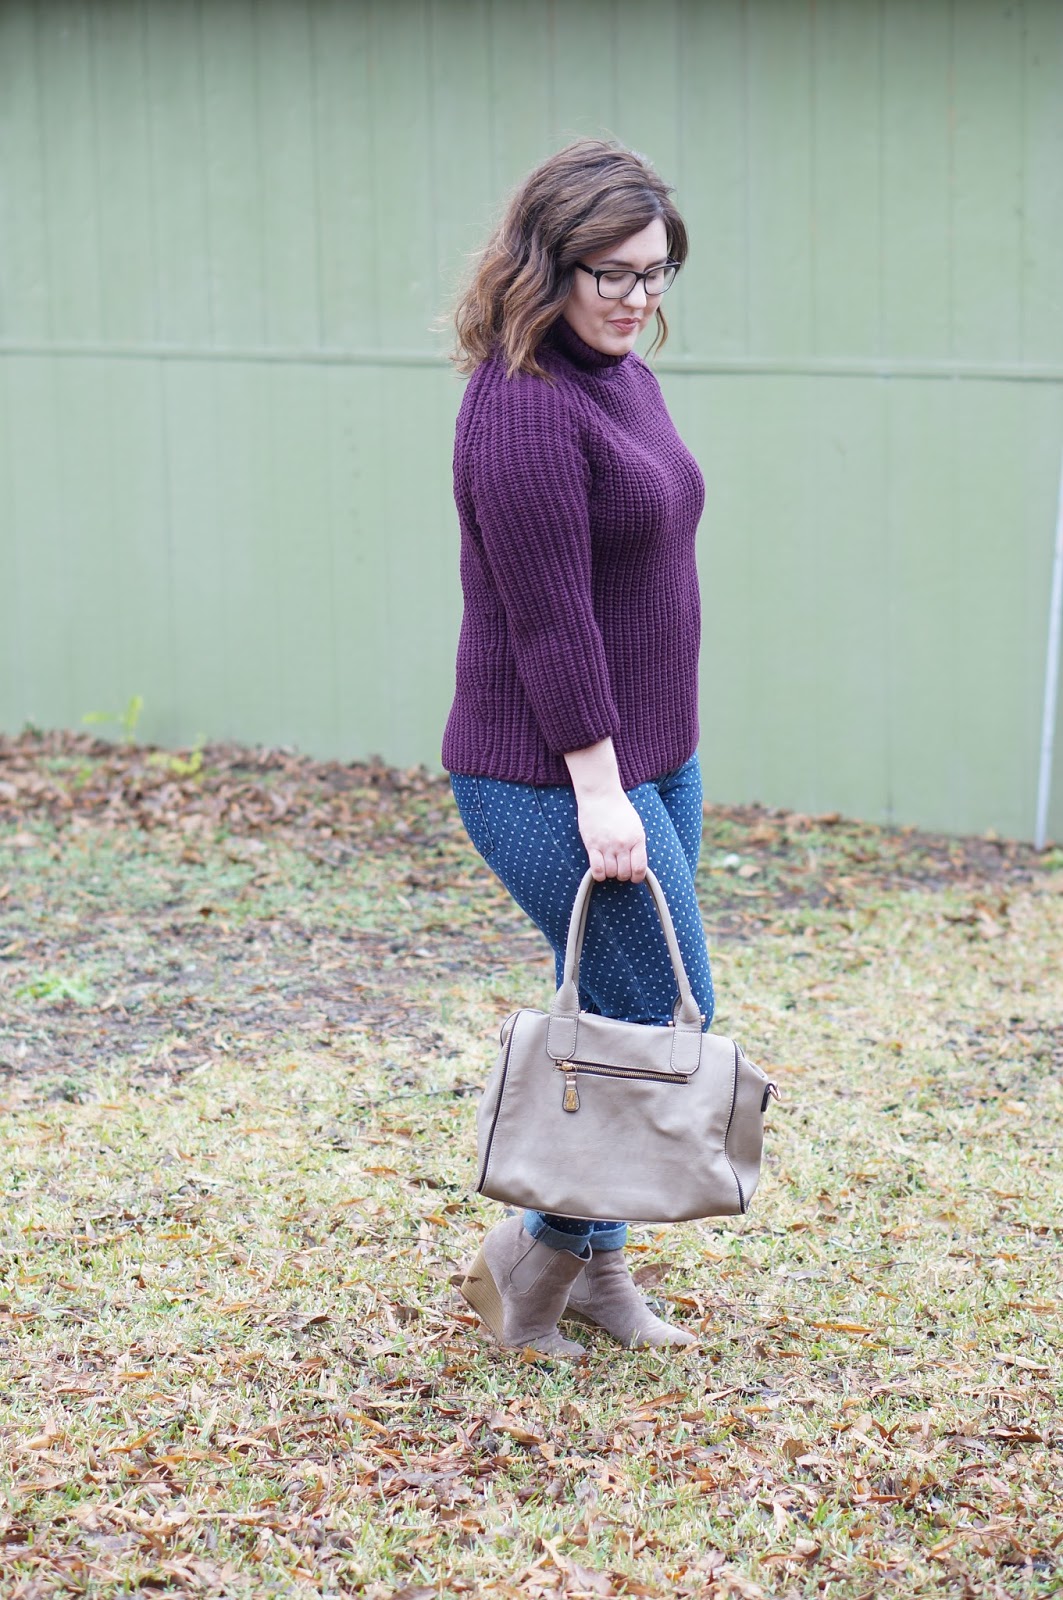 Rebecca Lately Rosegal Turtleneck Sweater Target Polka Dot Jeans Taupe Booties Street Level Stitch Fix Bag